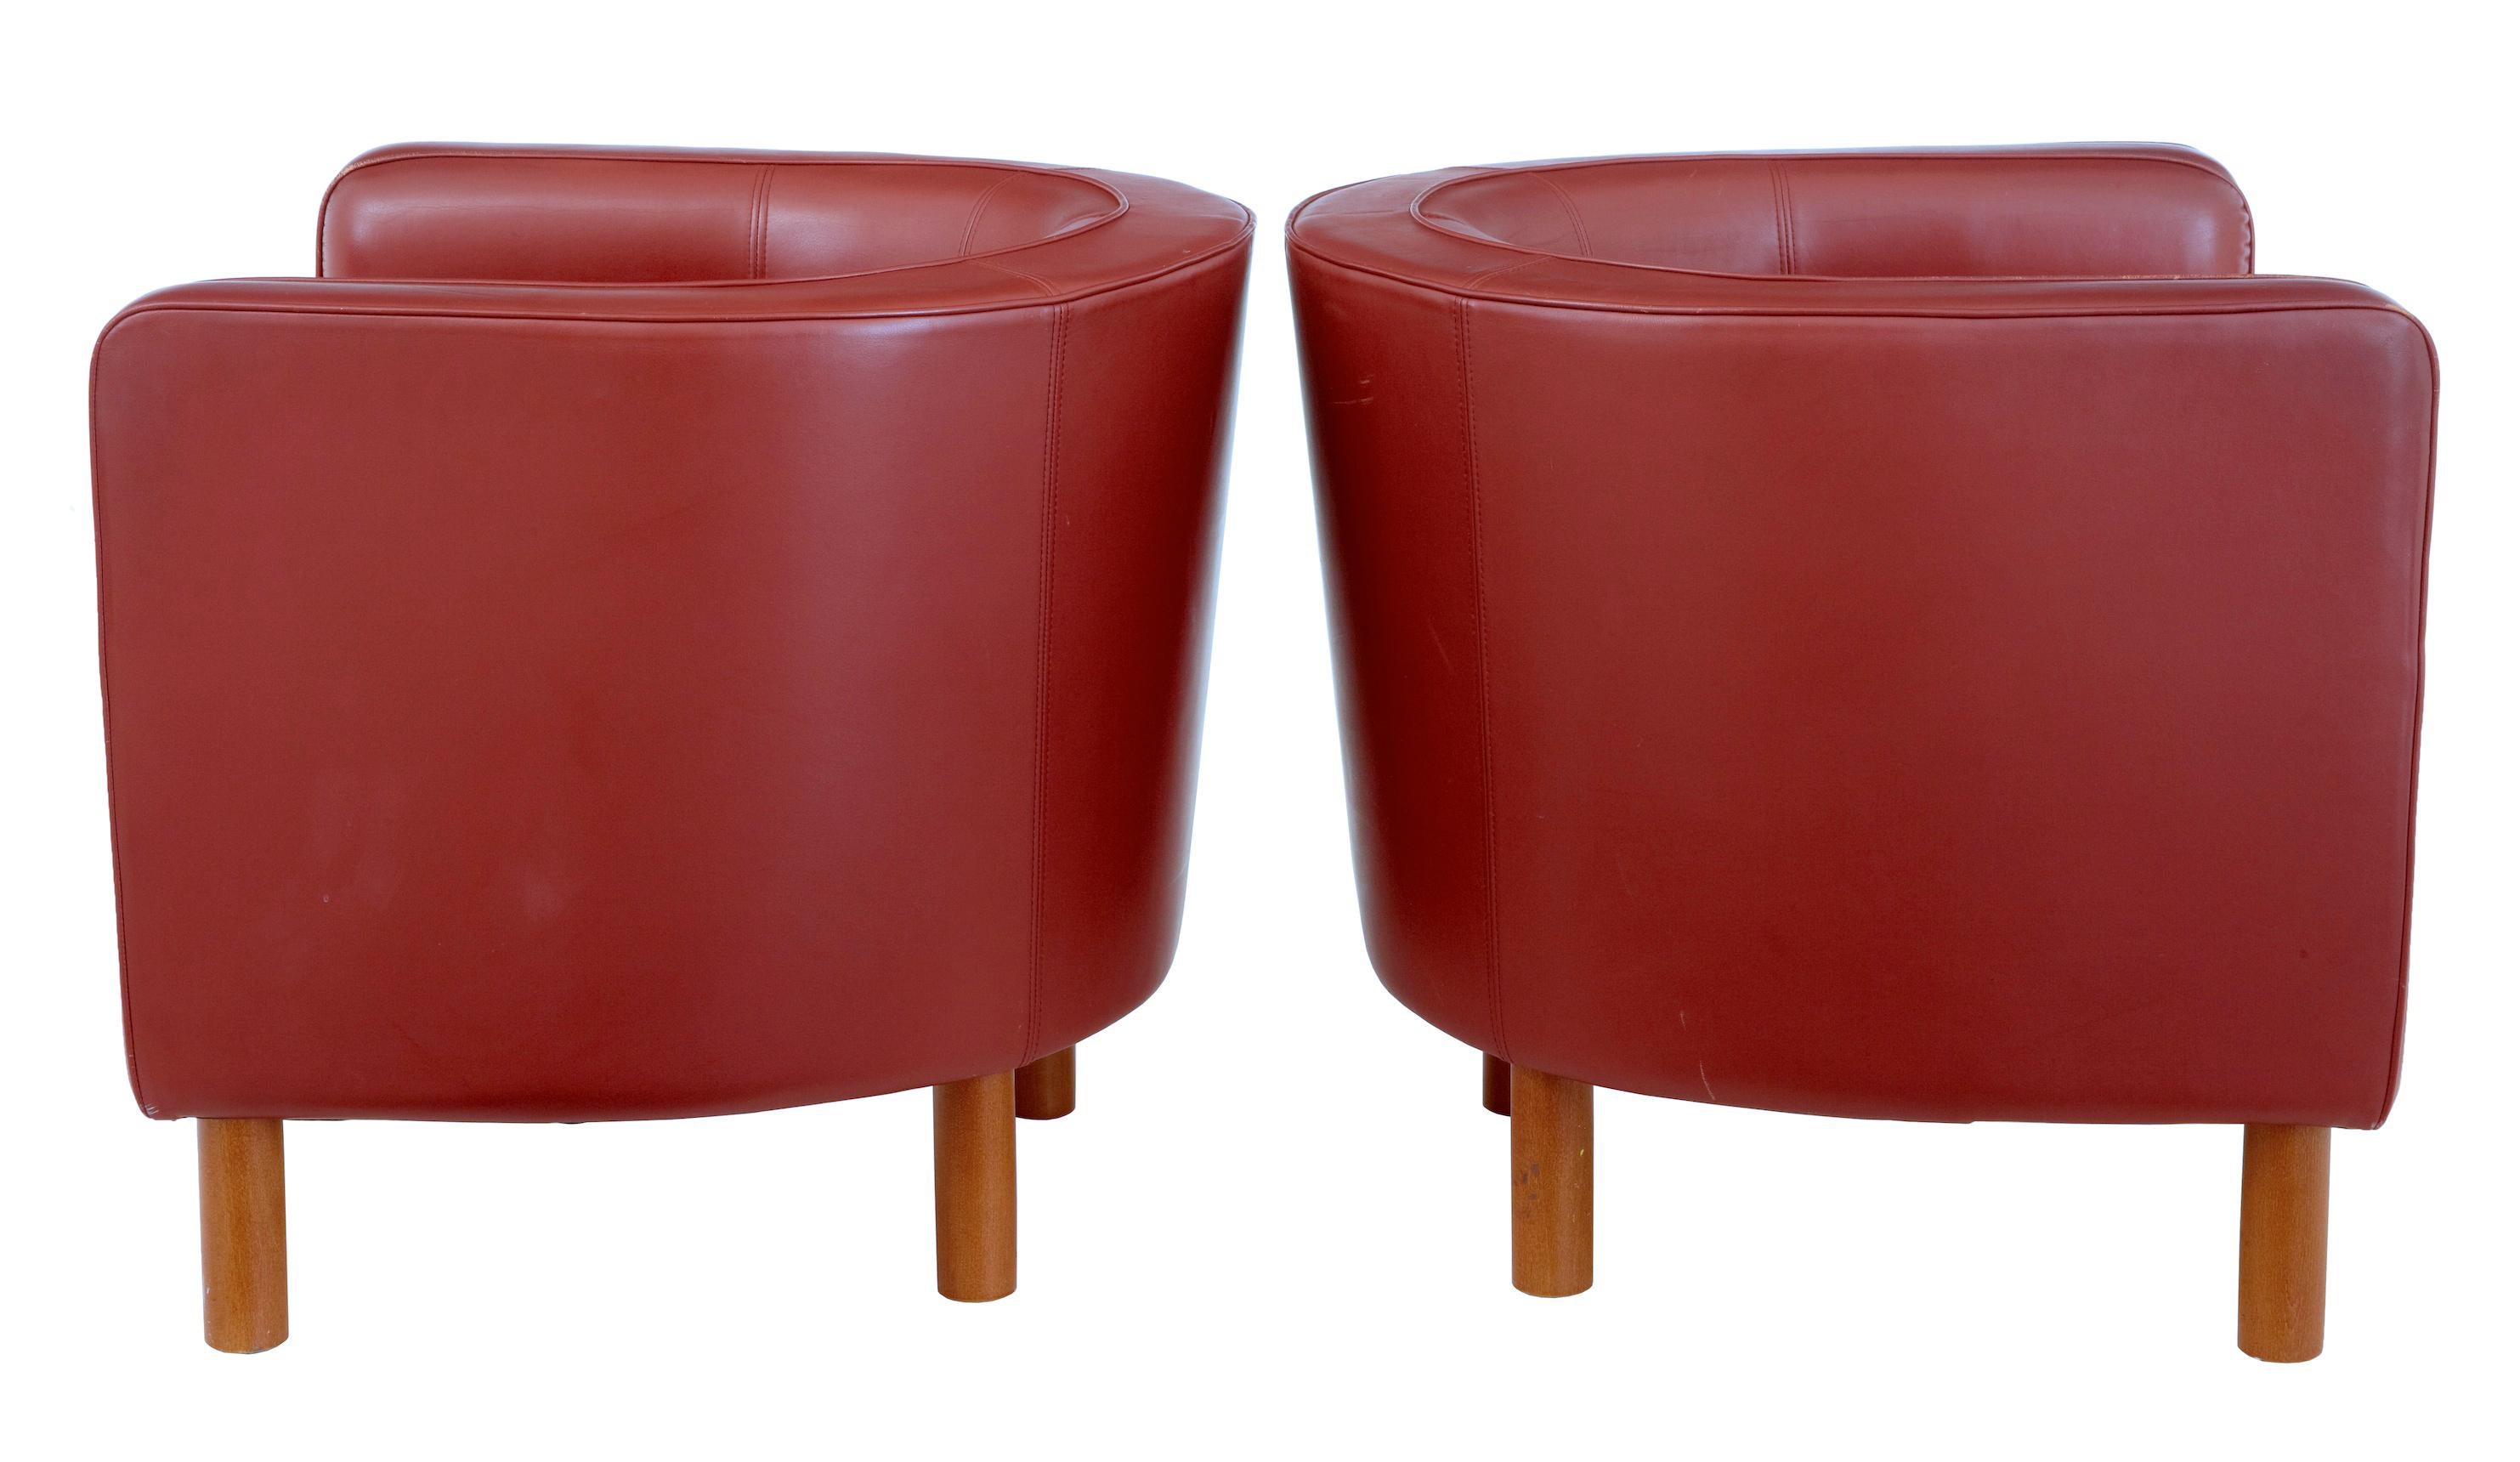 Pair of 1970s Scandinavian large red leather club armchairs, circa 1970.

Upholstered in rusty red leather with matching piping. Beech round legs and exposed front under frame. Very comfortable and stylish. Some wear to leather piping, 1 scuff to